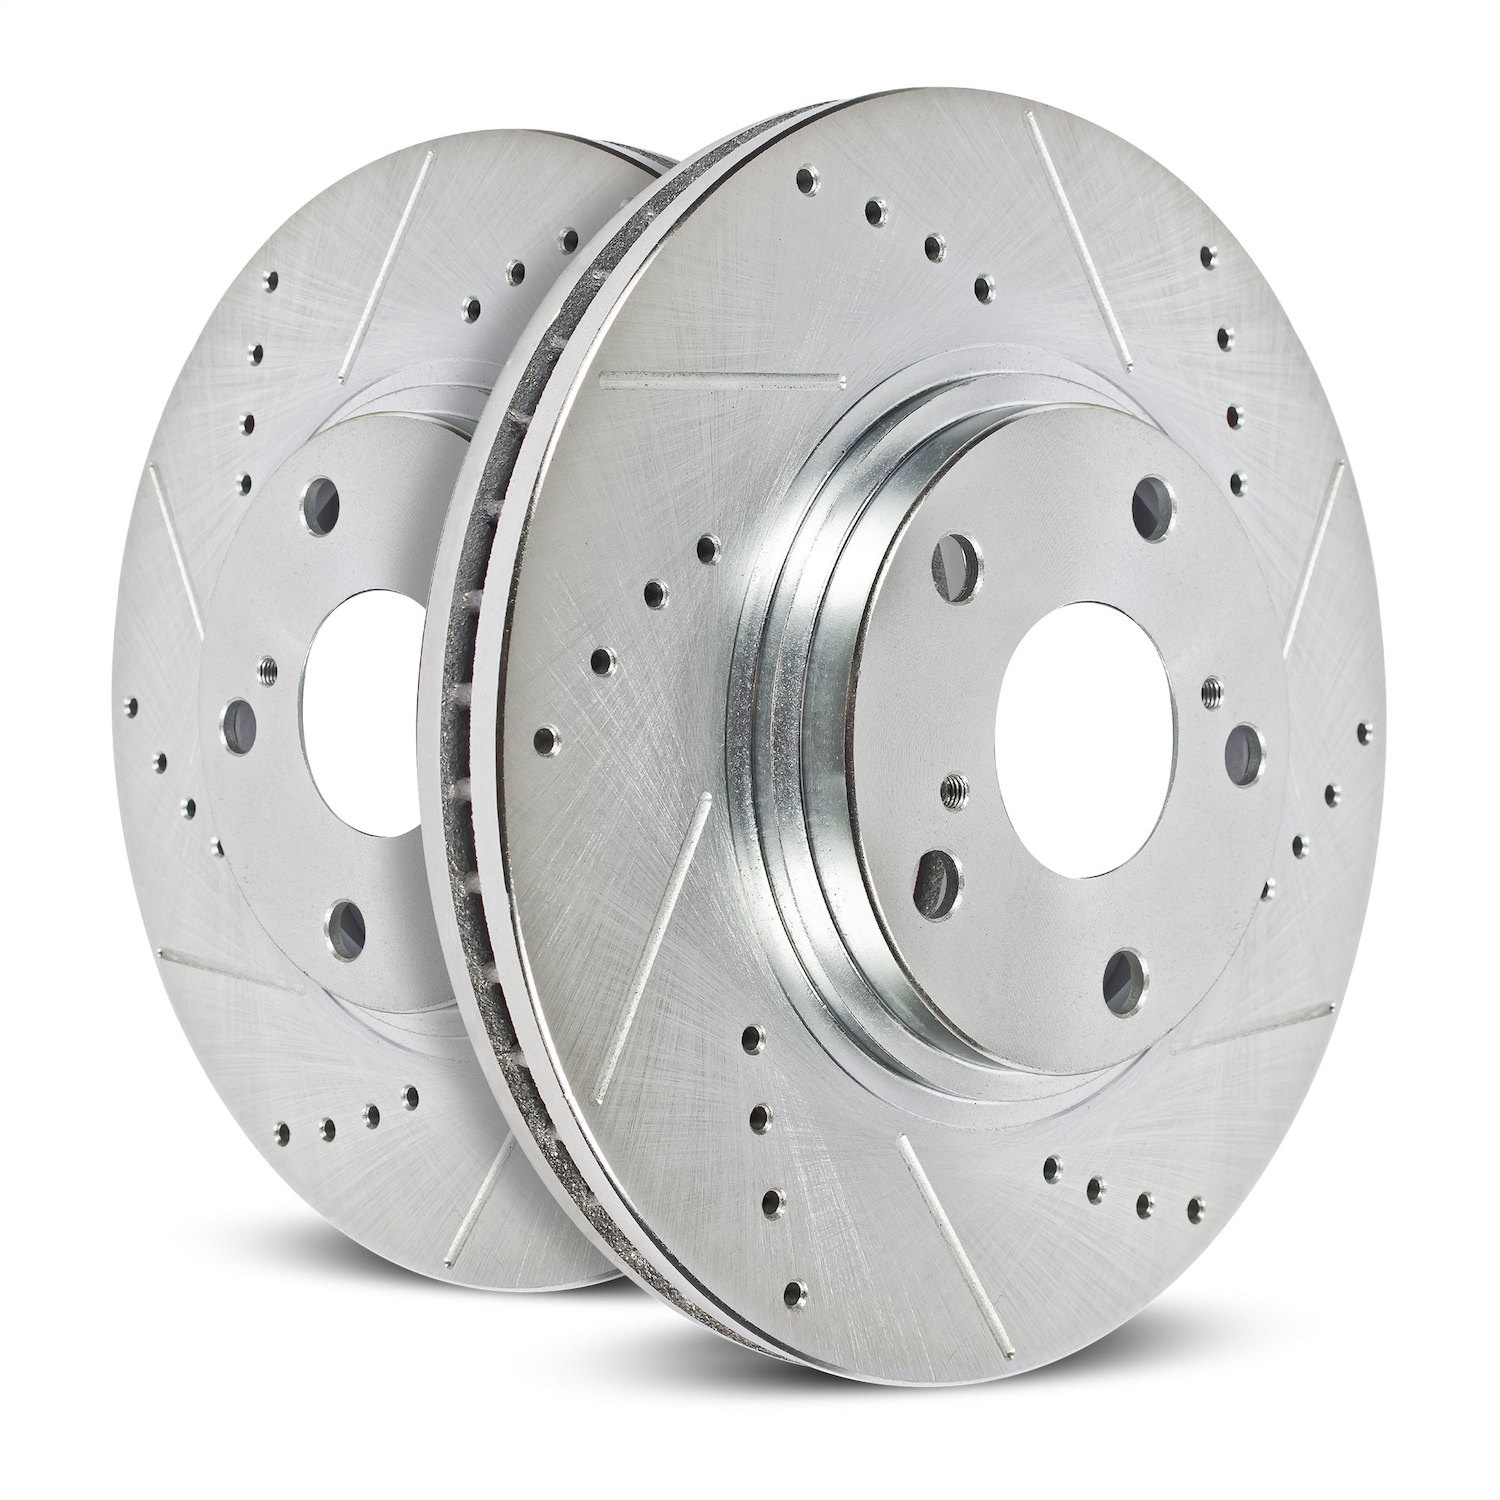 Extreme Performance Drilled And Slotted Front Brake Rotor Fits Late Model Ram 1500 [Left/Driver Side]